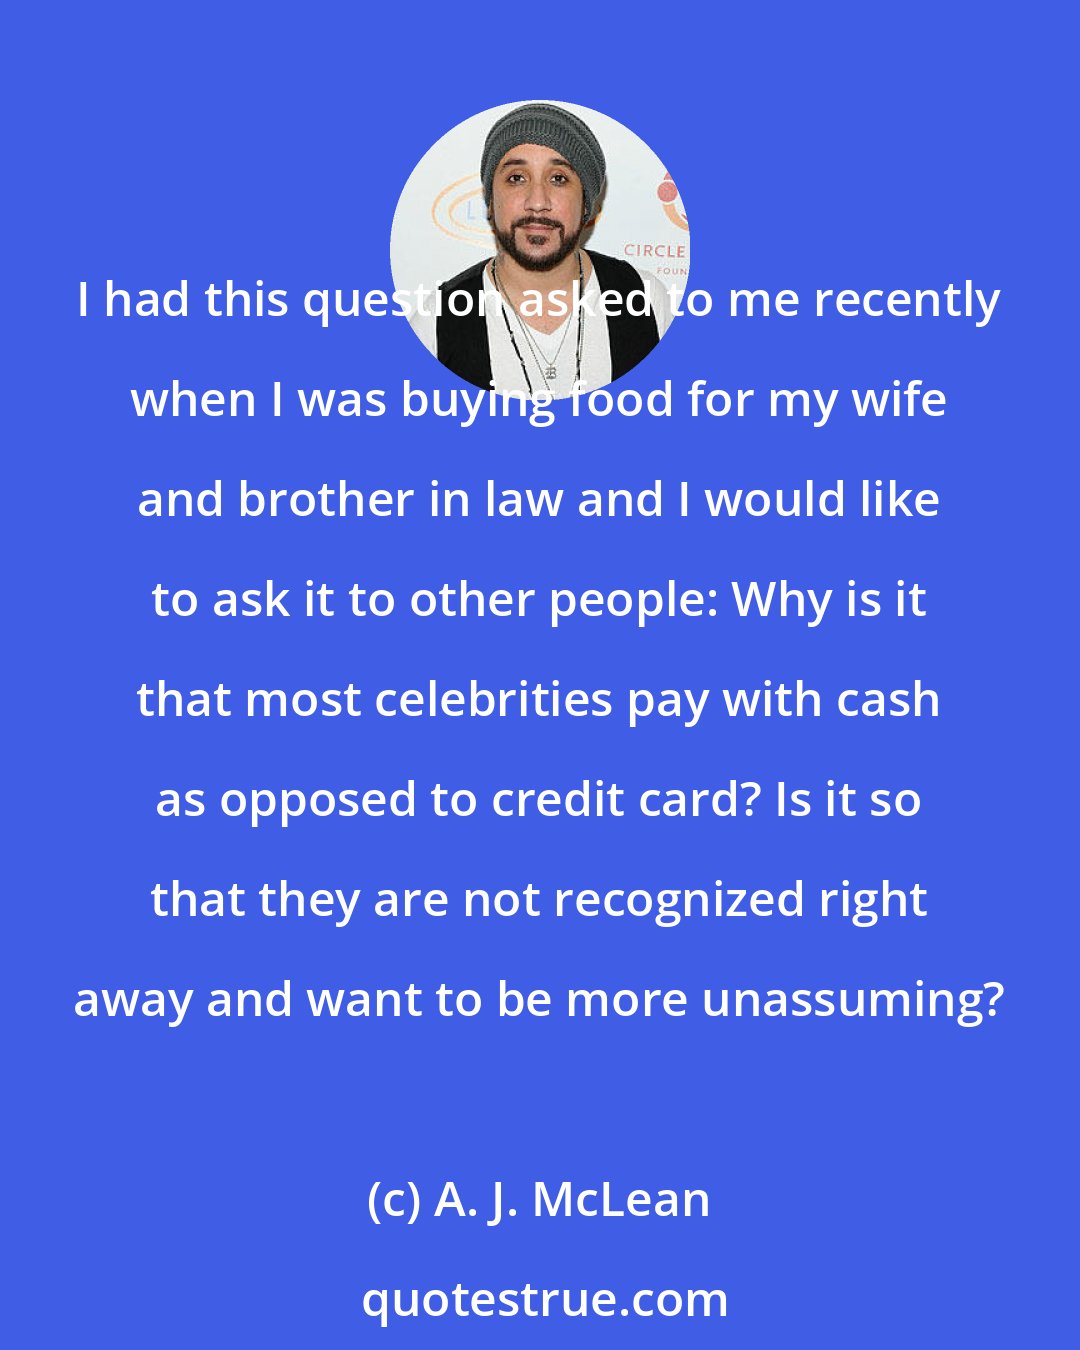 A. J. McLean: I had this question asked to me recently when I was buying food for my wife and brother in law and I would like to ask it to other people: Why is it that most celebrities pay with cash as opposed to credit card? Is it so that they are not recognized right away and want to be more unassuming?